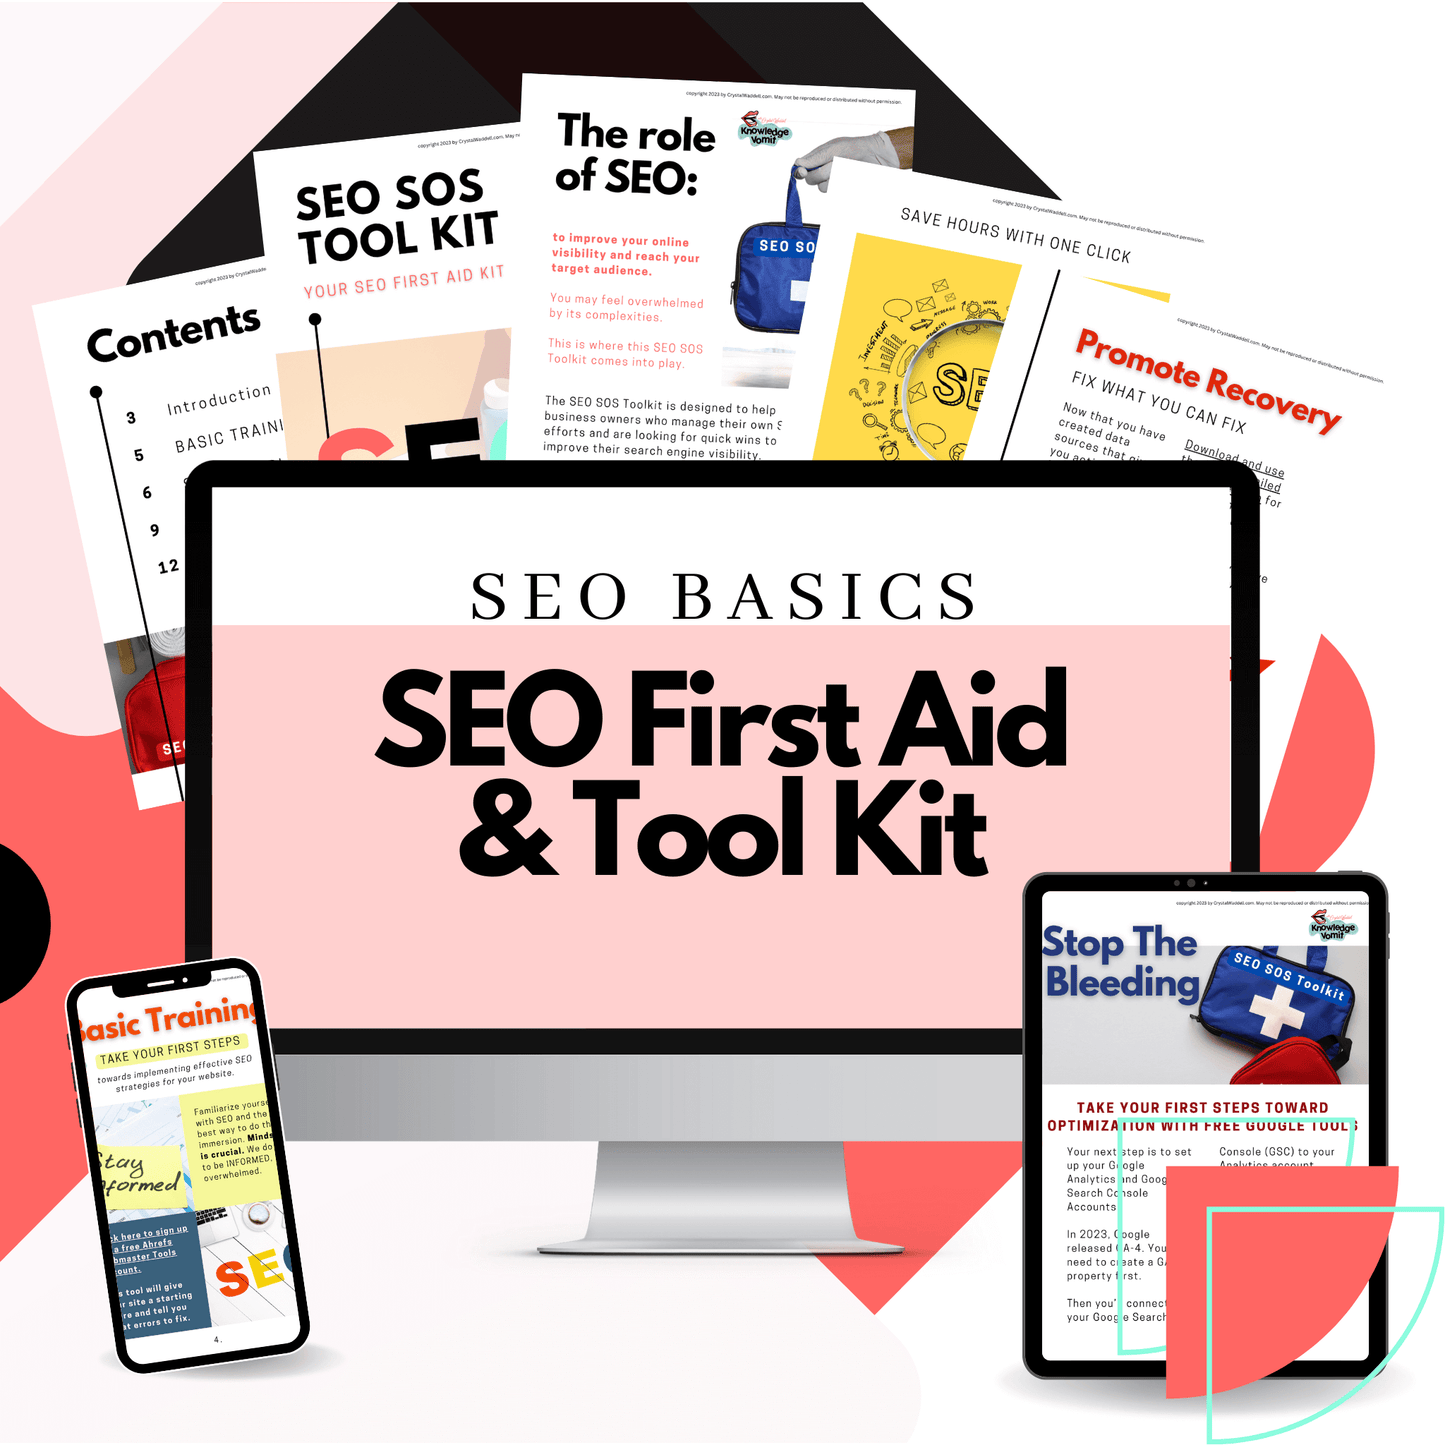 Take a look at the resources provided in the SeO Basics SEO first Aid and tool kit downloadable.